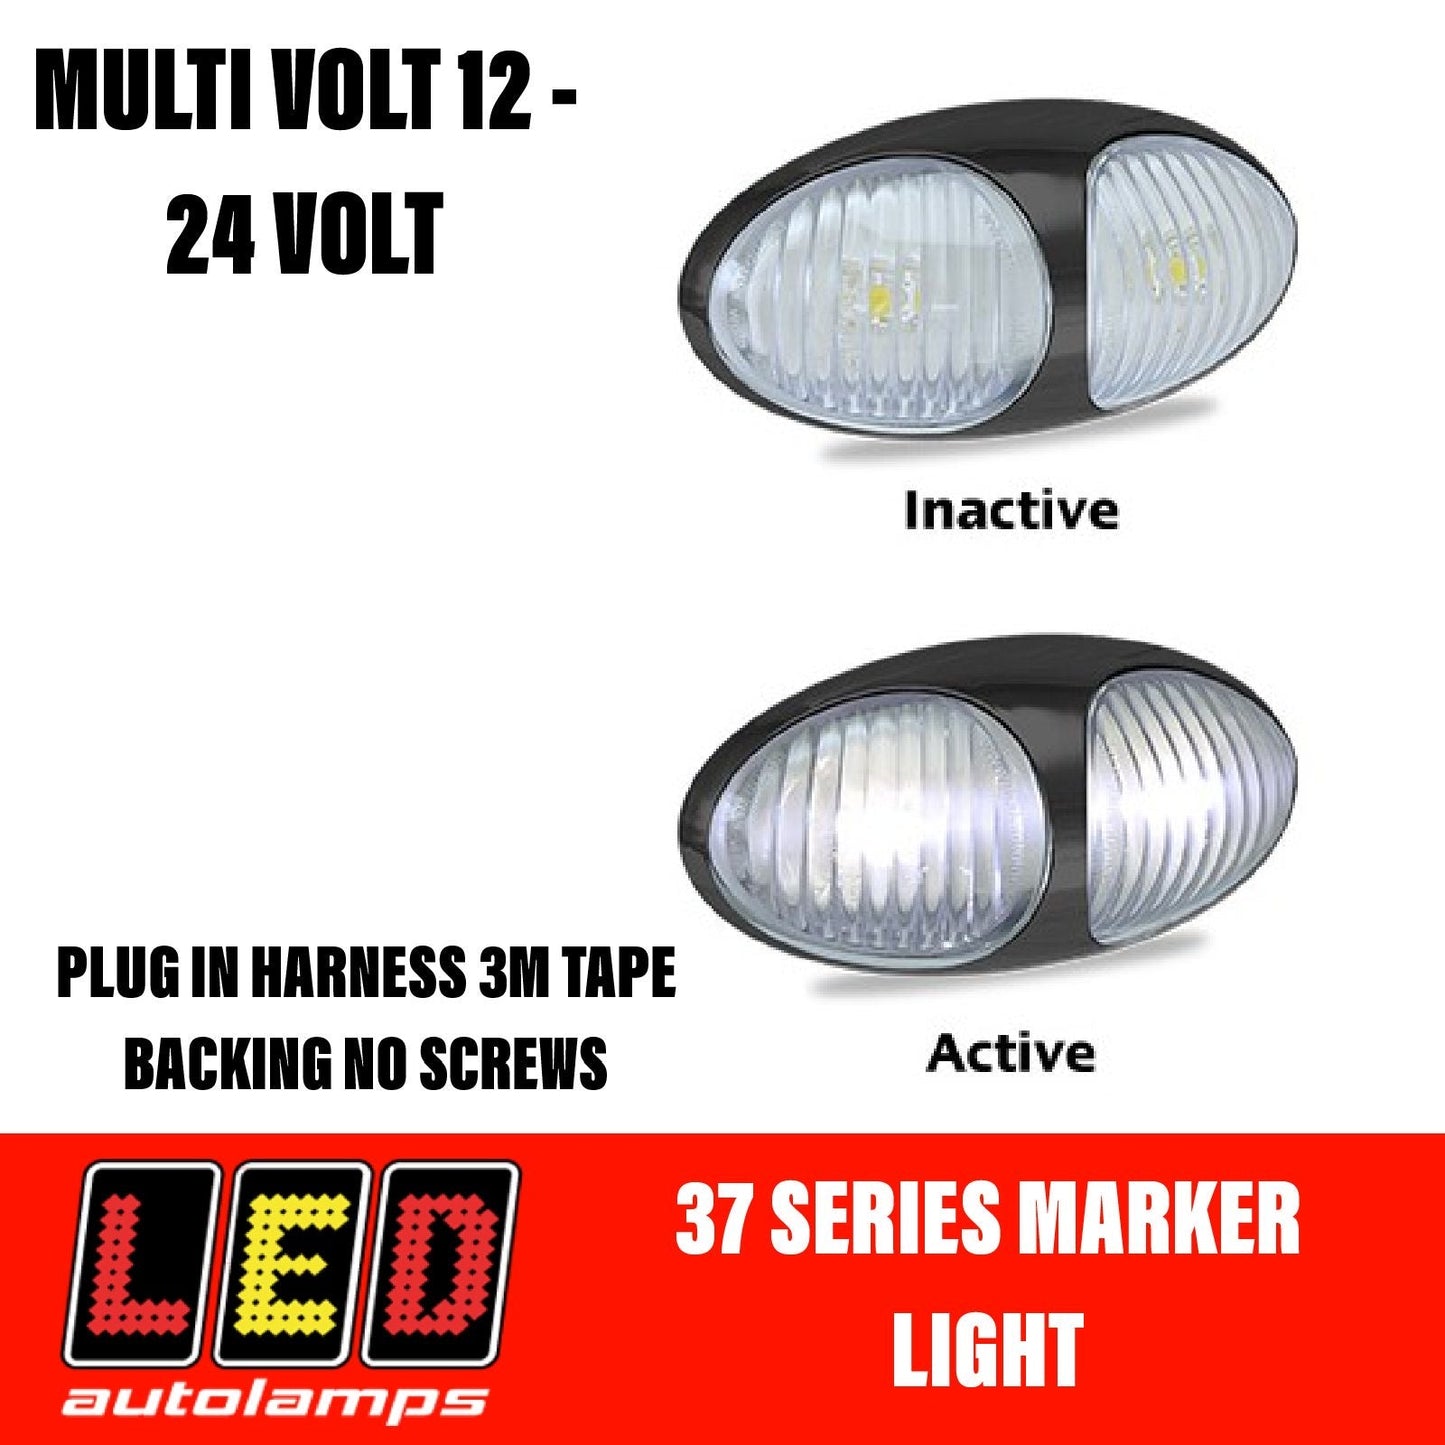 LED AUTOLAMPS White Marker Lamp Easy Fit 3M Tape 5 Year Warranty